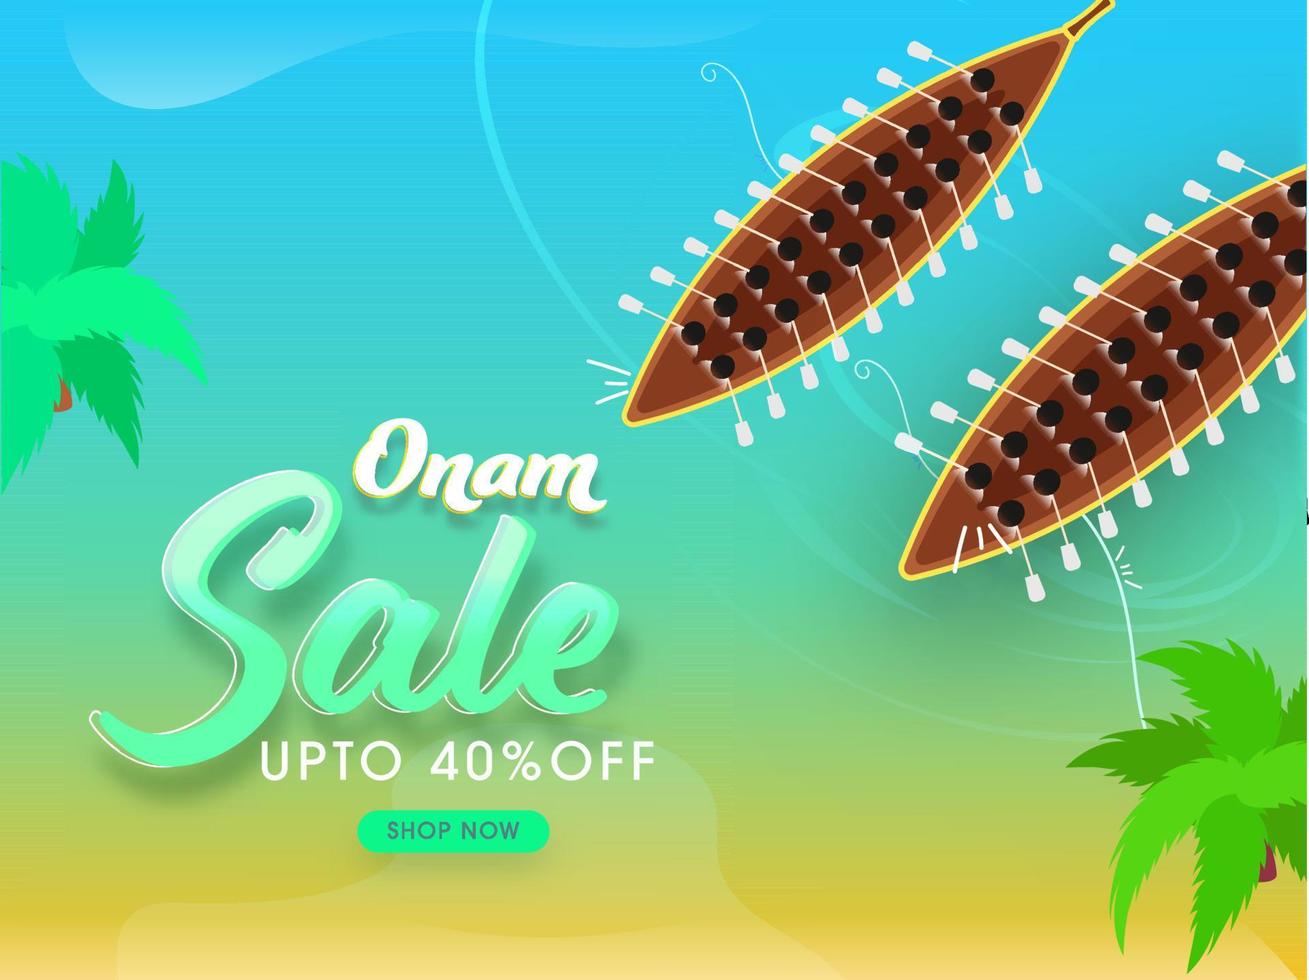 Onam Sale Poster Design with Discount Offer and Top View Aranmula Boat Race on Gradient Blue and Green Background. vector